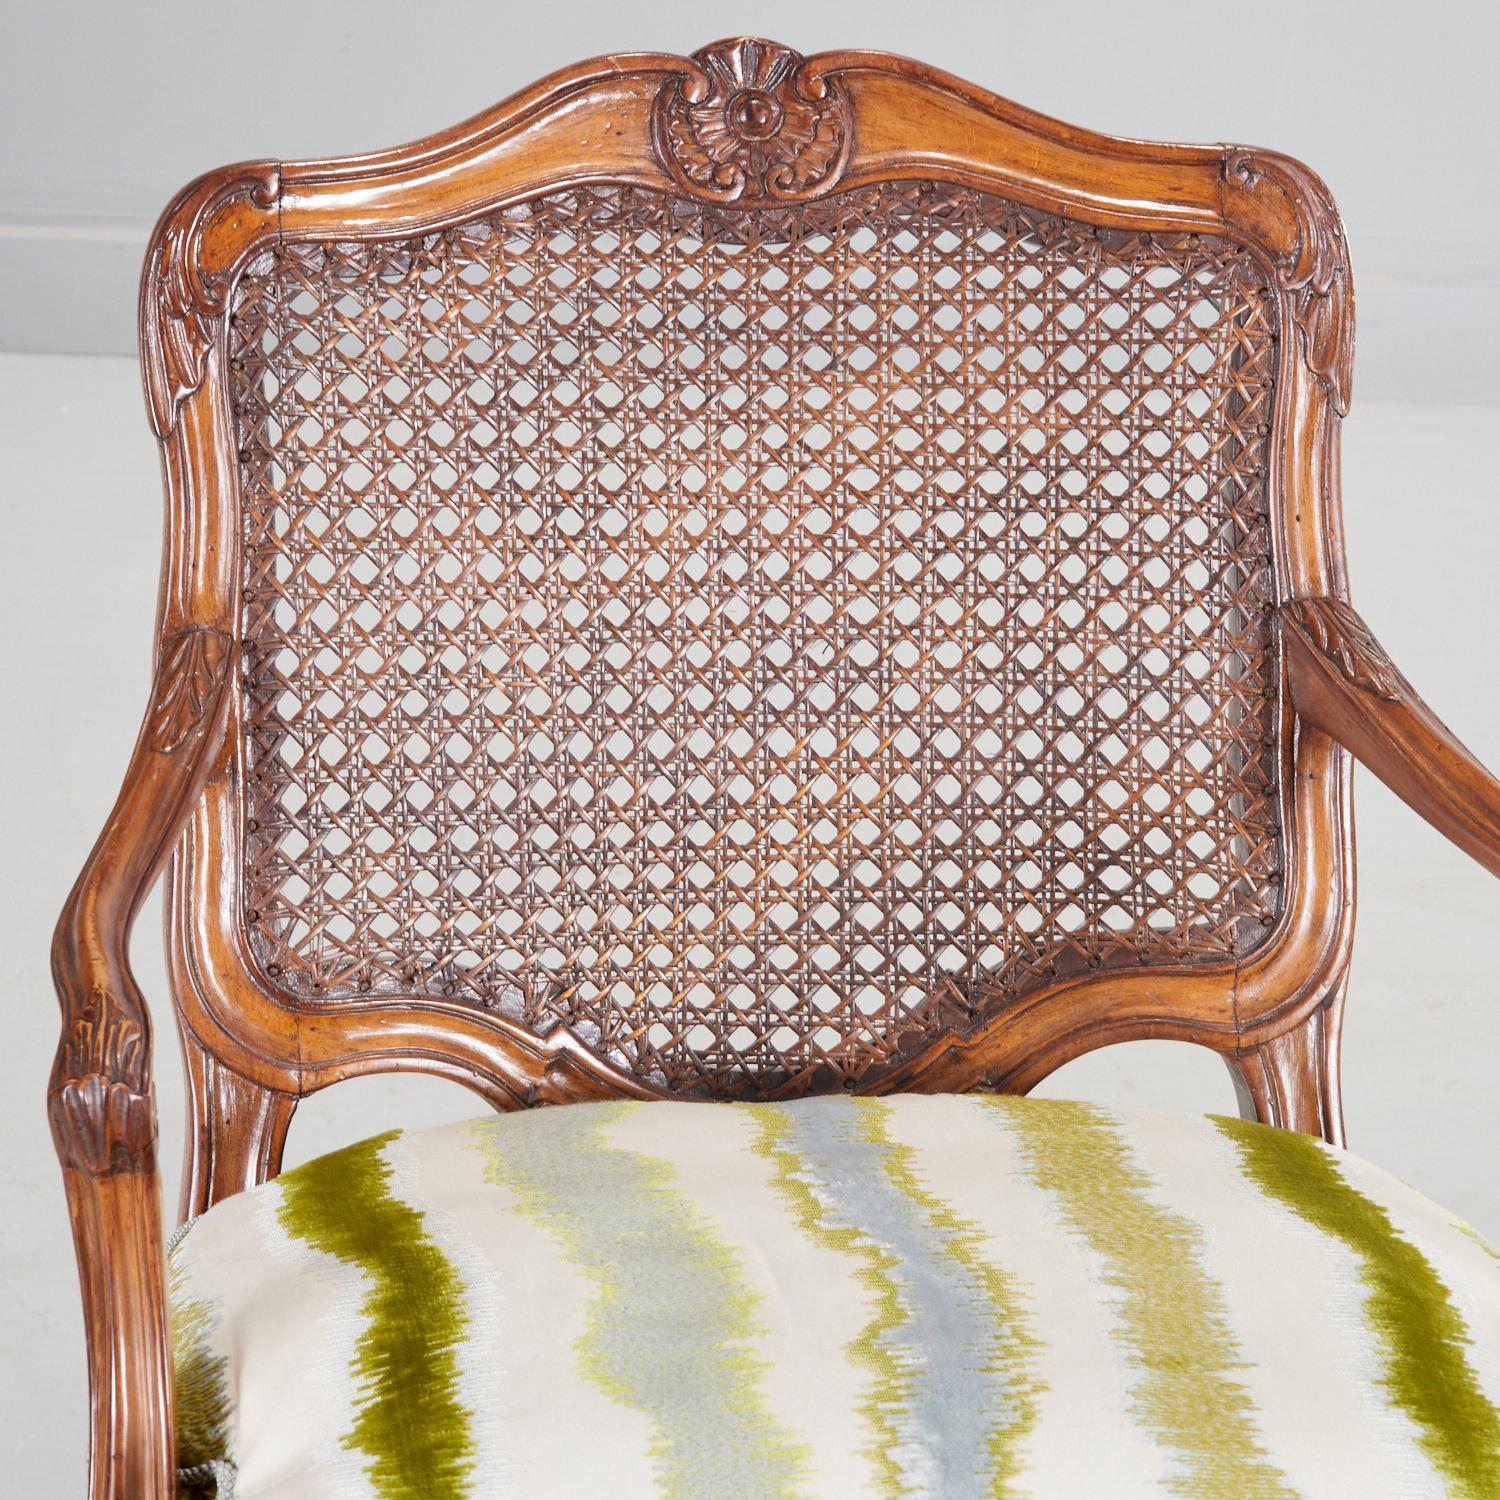 A pair of 20th century, Louis XV style carved fauteuils with caned back and upholstered seat. The beechwood channel carved frame is decorated with rosettes and acanthus fronds. Cabriole legs terminate in whorl feet. A loose down-filled seat cushion